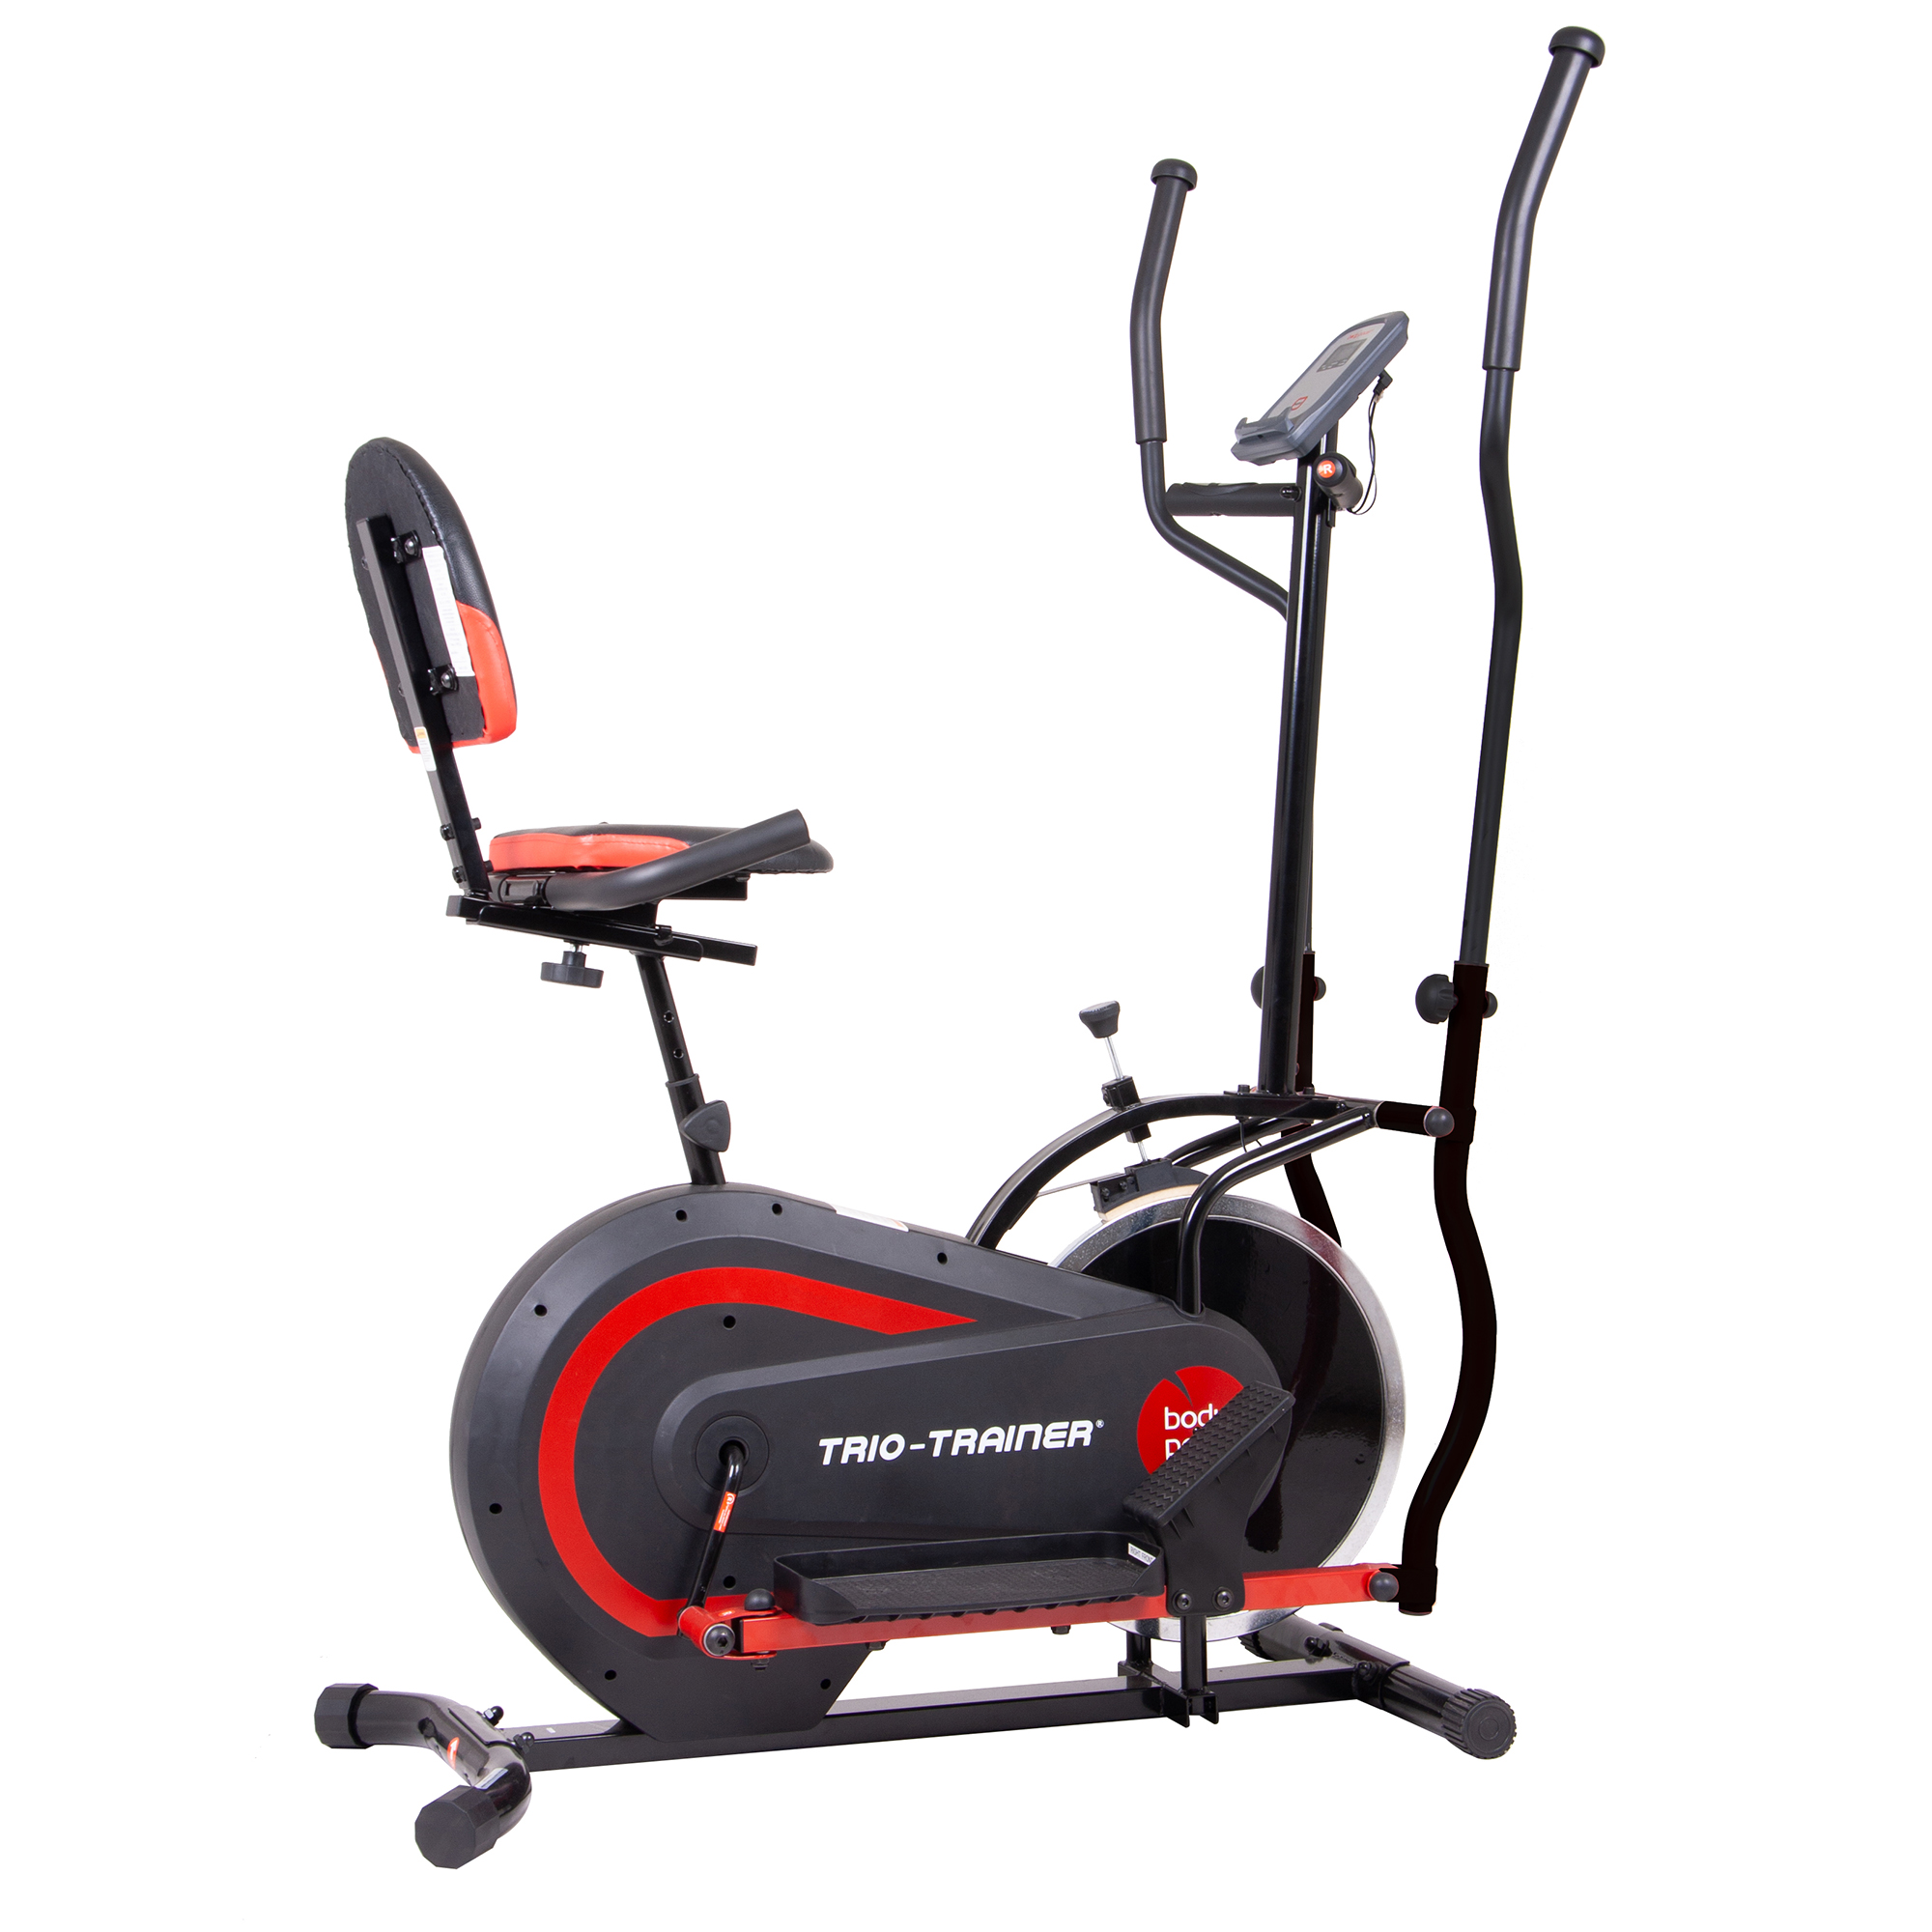 Body Flex Sports 3 in 1 Trio Trainer Home Gym Cardio Exercise Fitness Machine - image 3 of 8